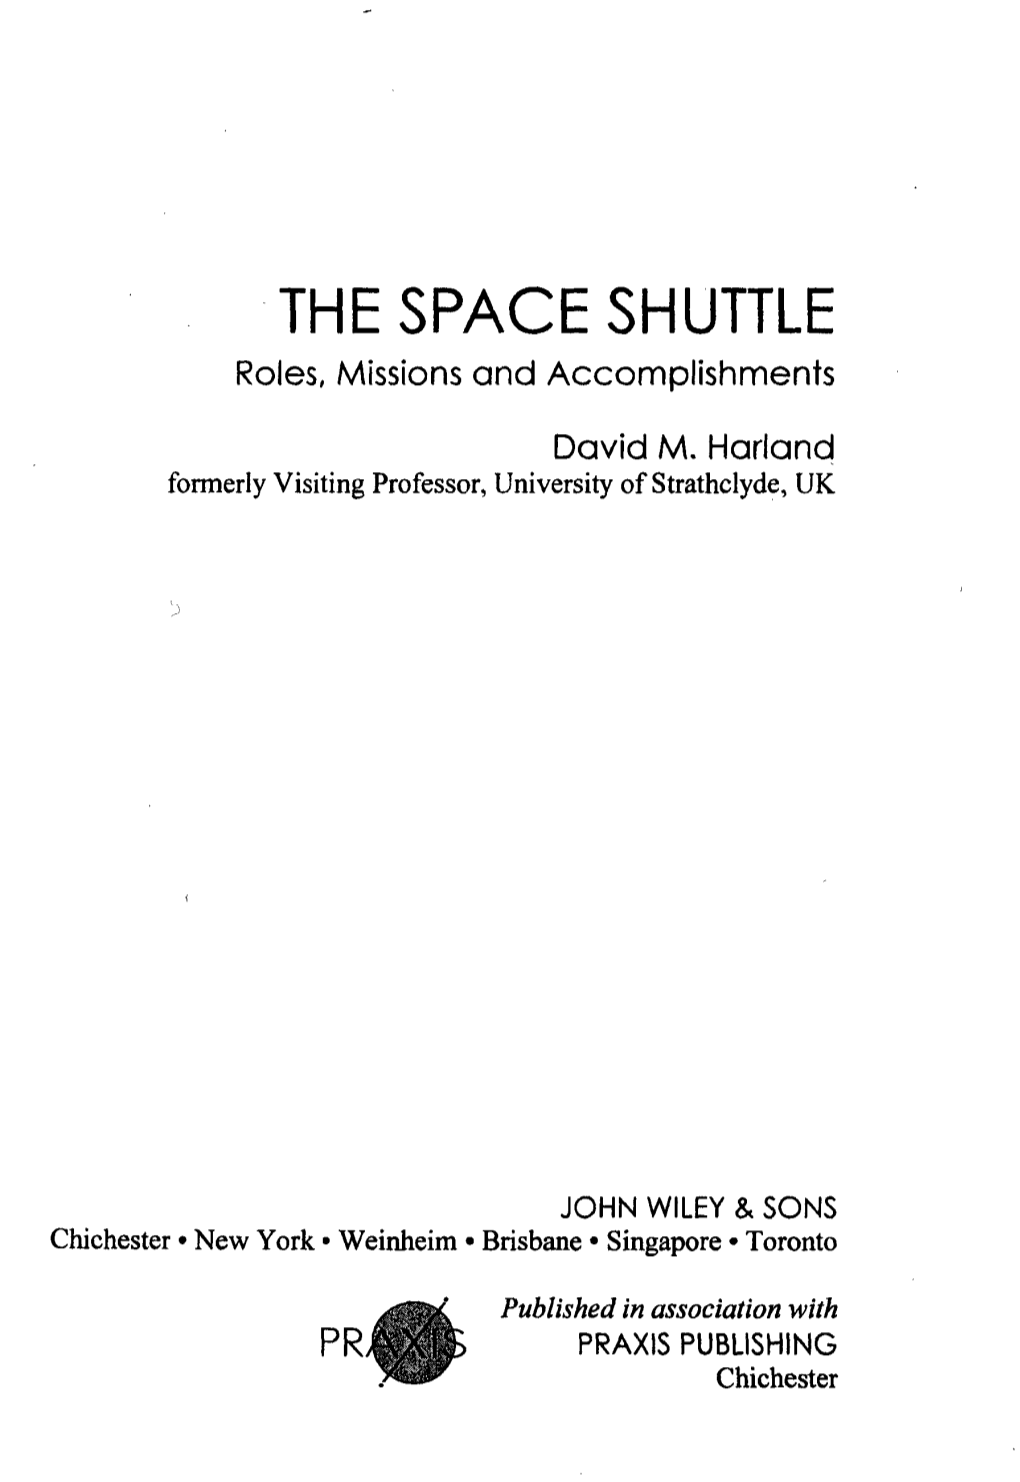 THE SPACE SHUTTLE Roles, Missions and Accomplishments